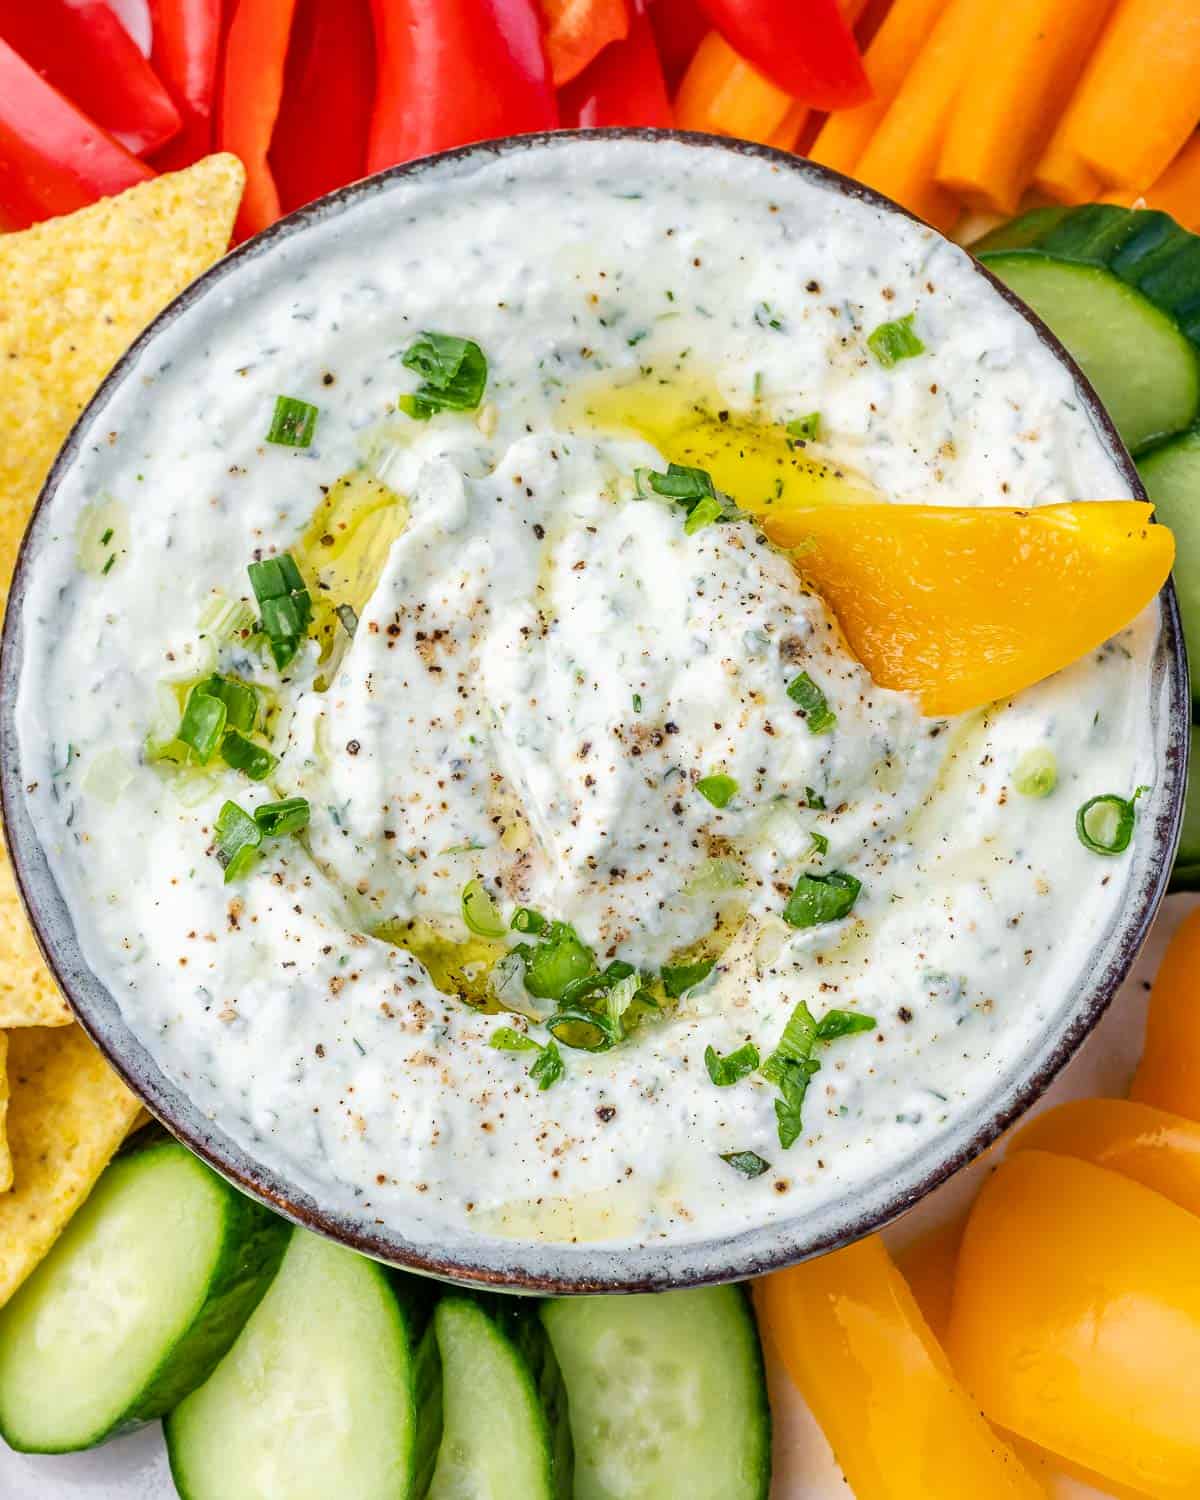 Cottage cheese dip with a slice of yellow bell pepper dipped in.